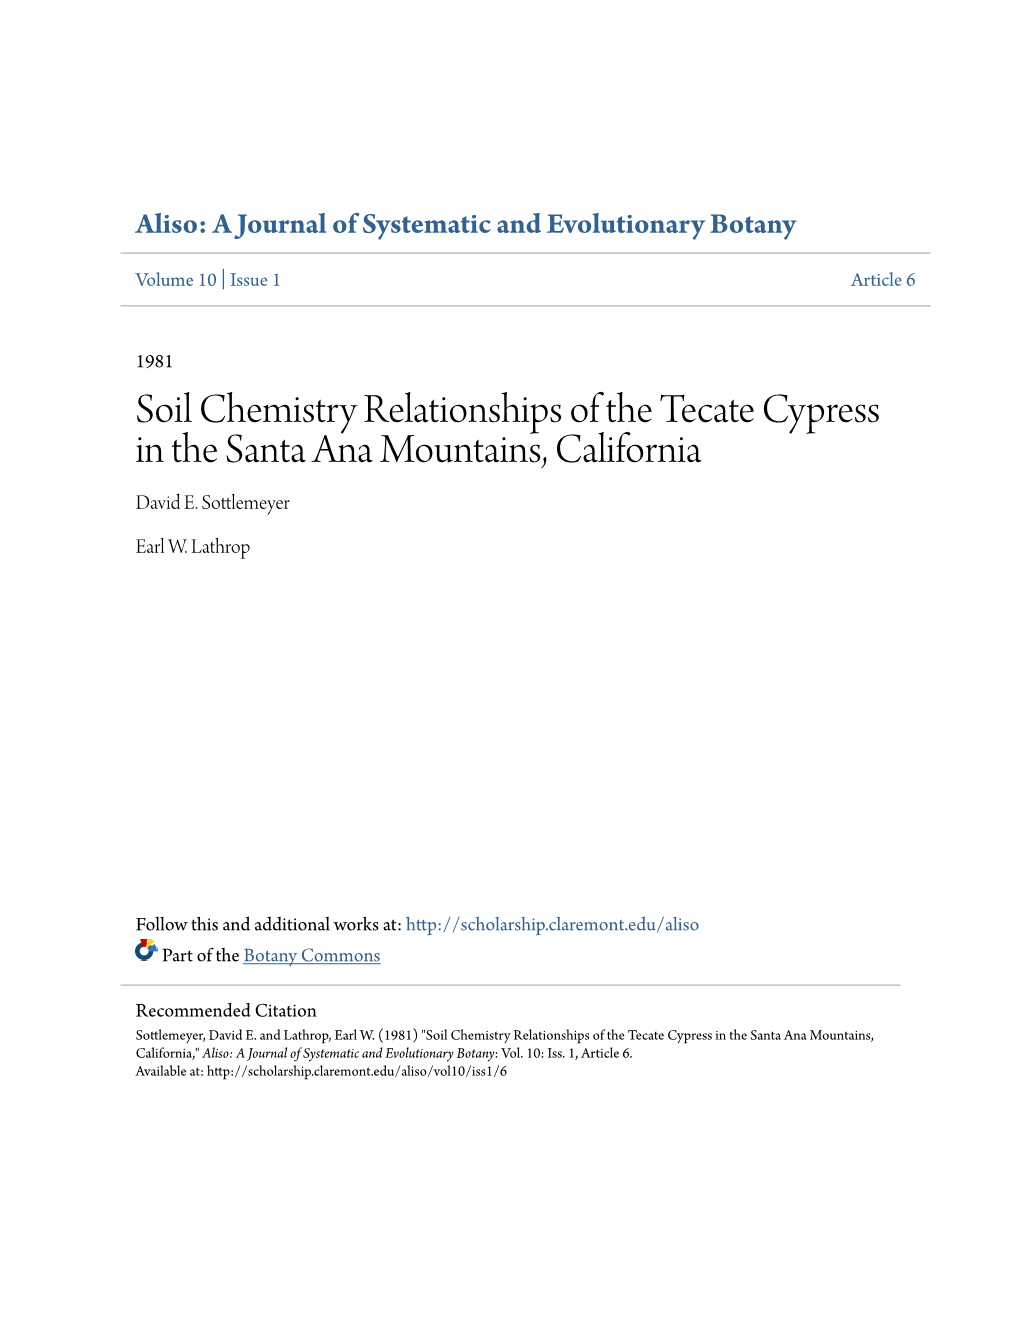 Soil Chemistry Relationships of the Tecate Cypress in the Santa Ana Mountains, California David E